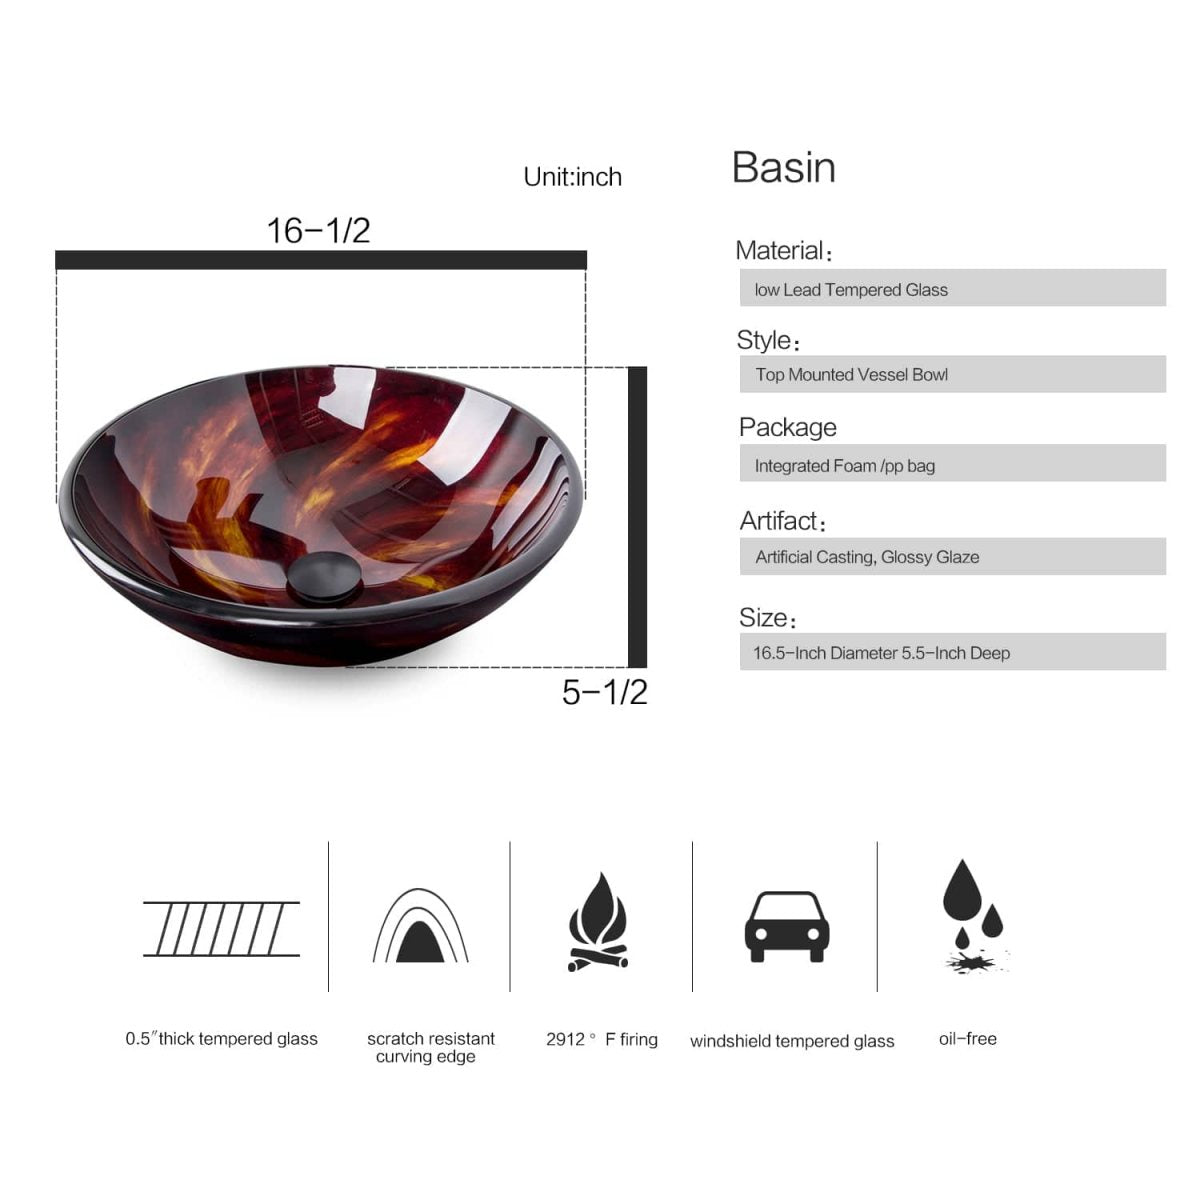 Elecwish Flame Red Round Sink basin size and description